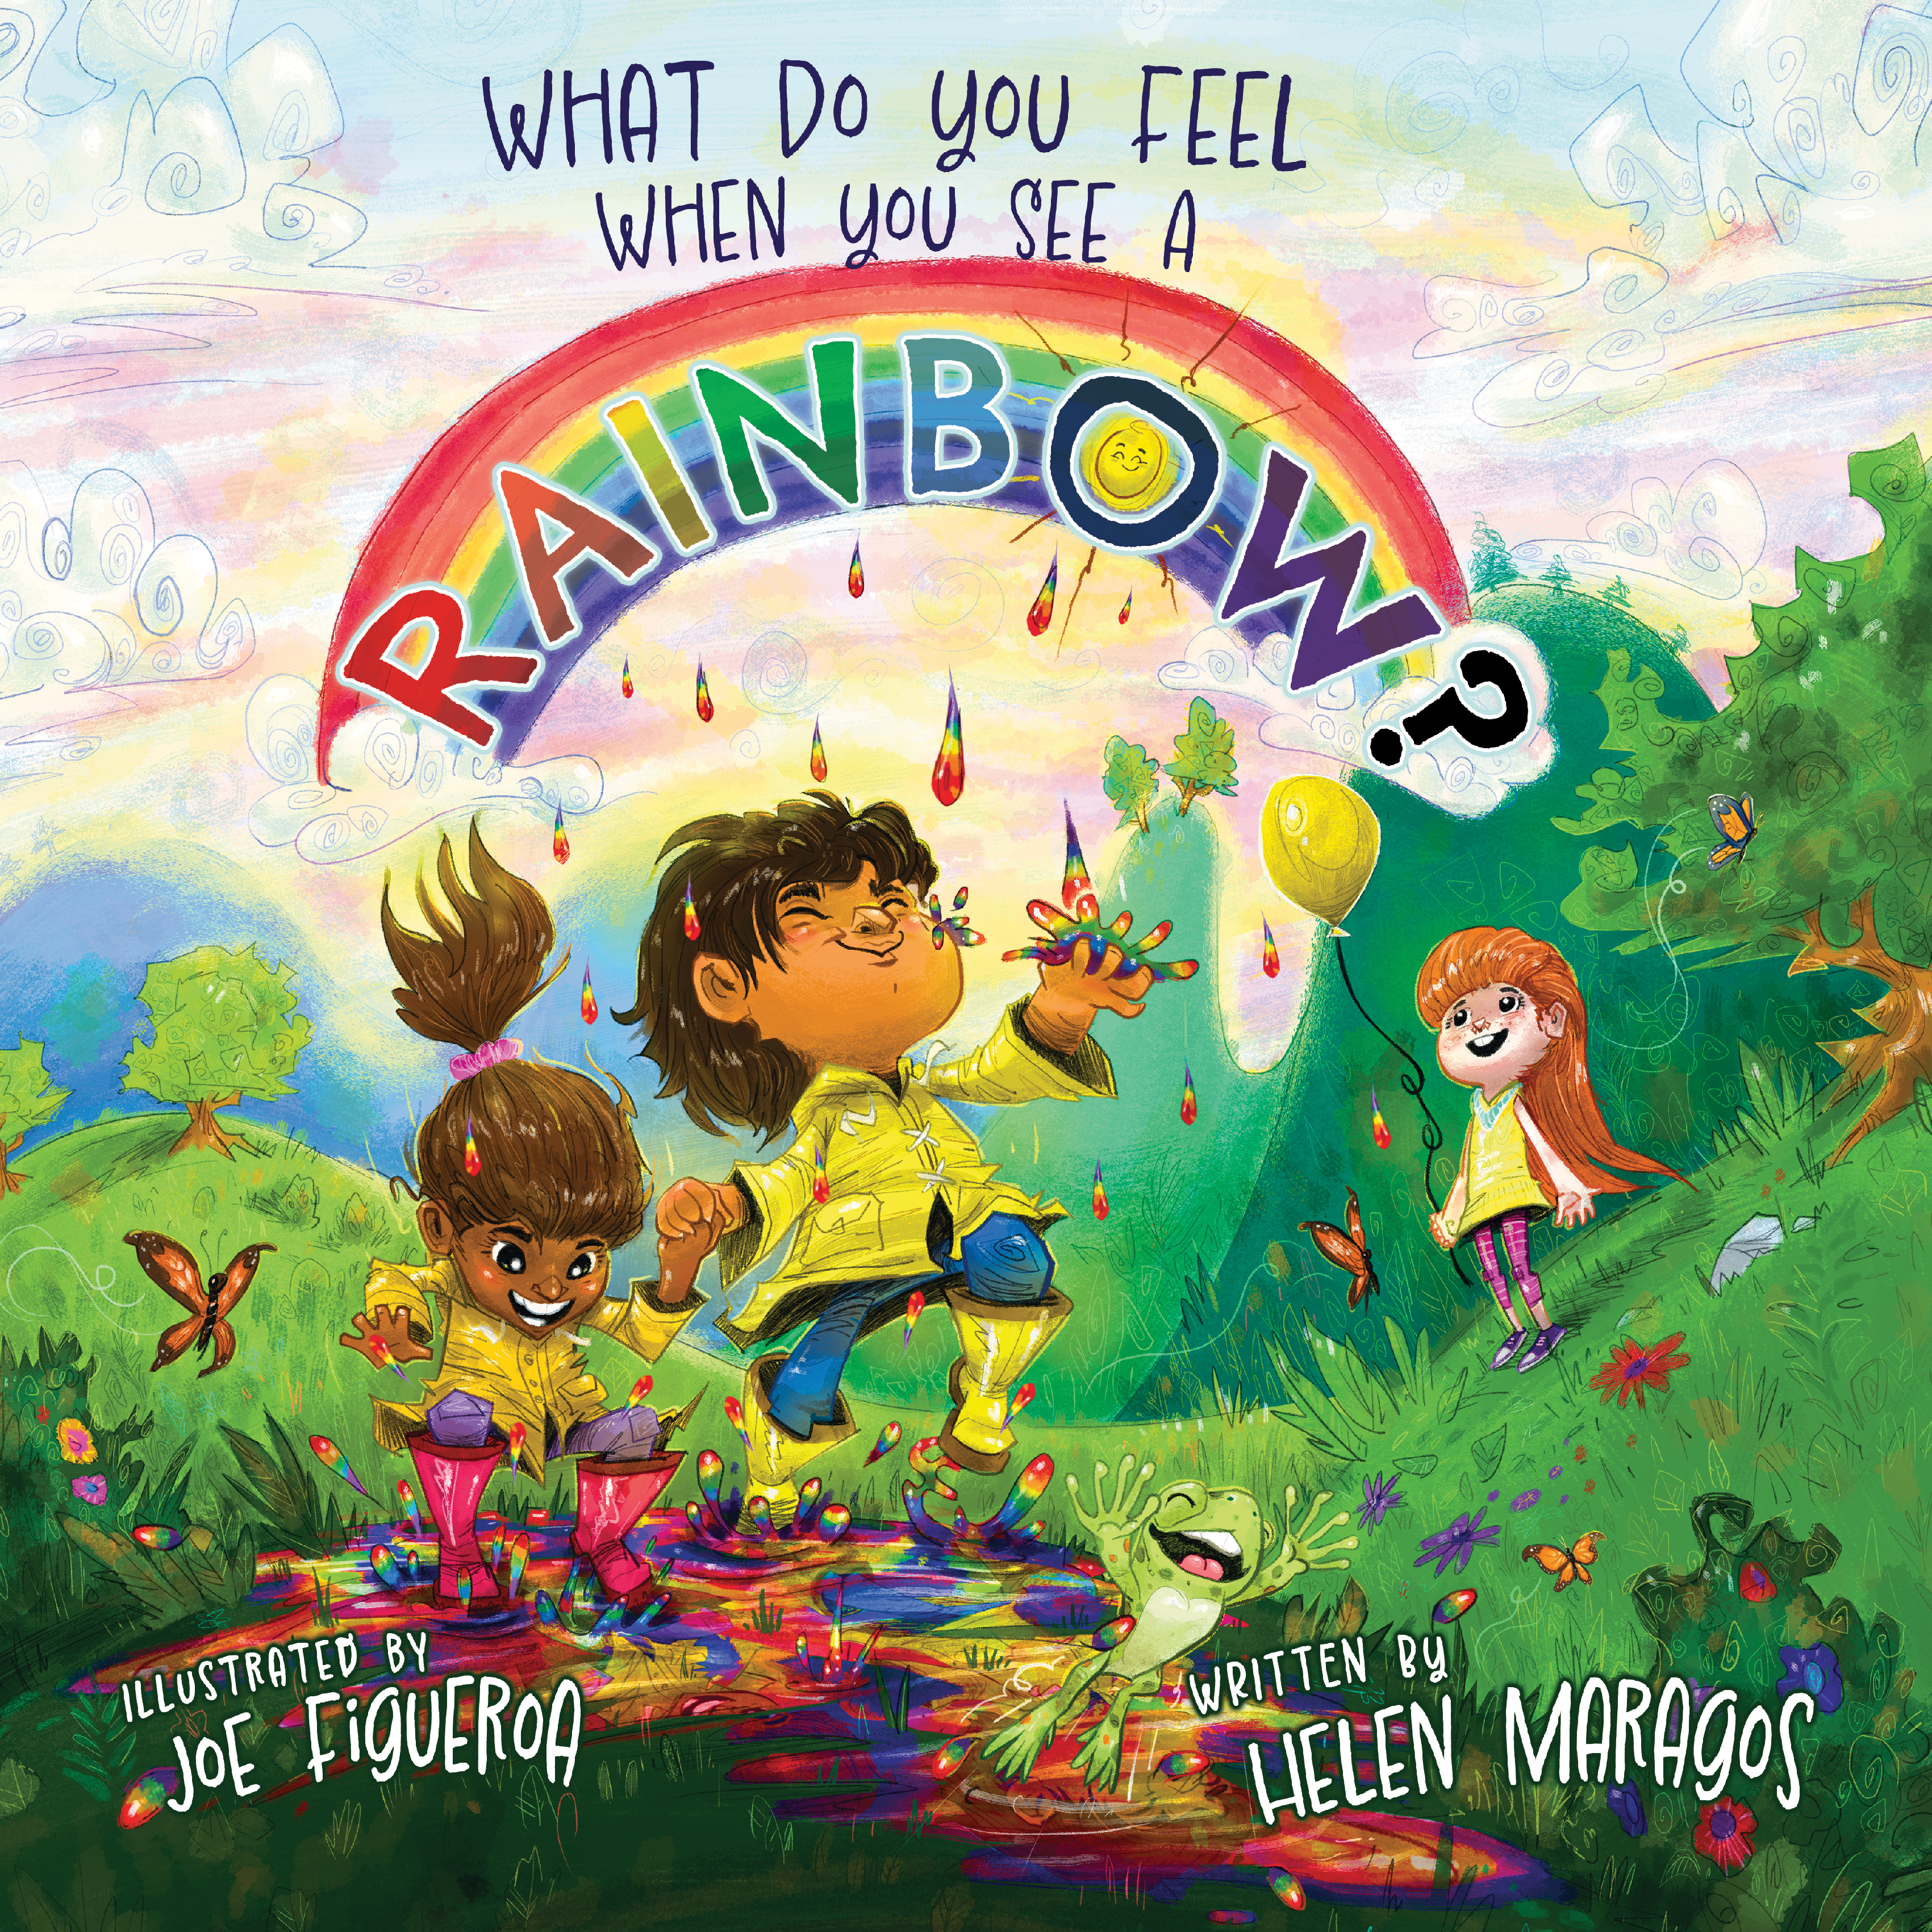 What Do You Feel When You See a Rainbow? by Helen Maragos _Spotlight Publishing House